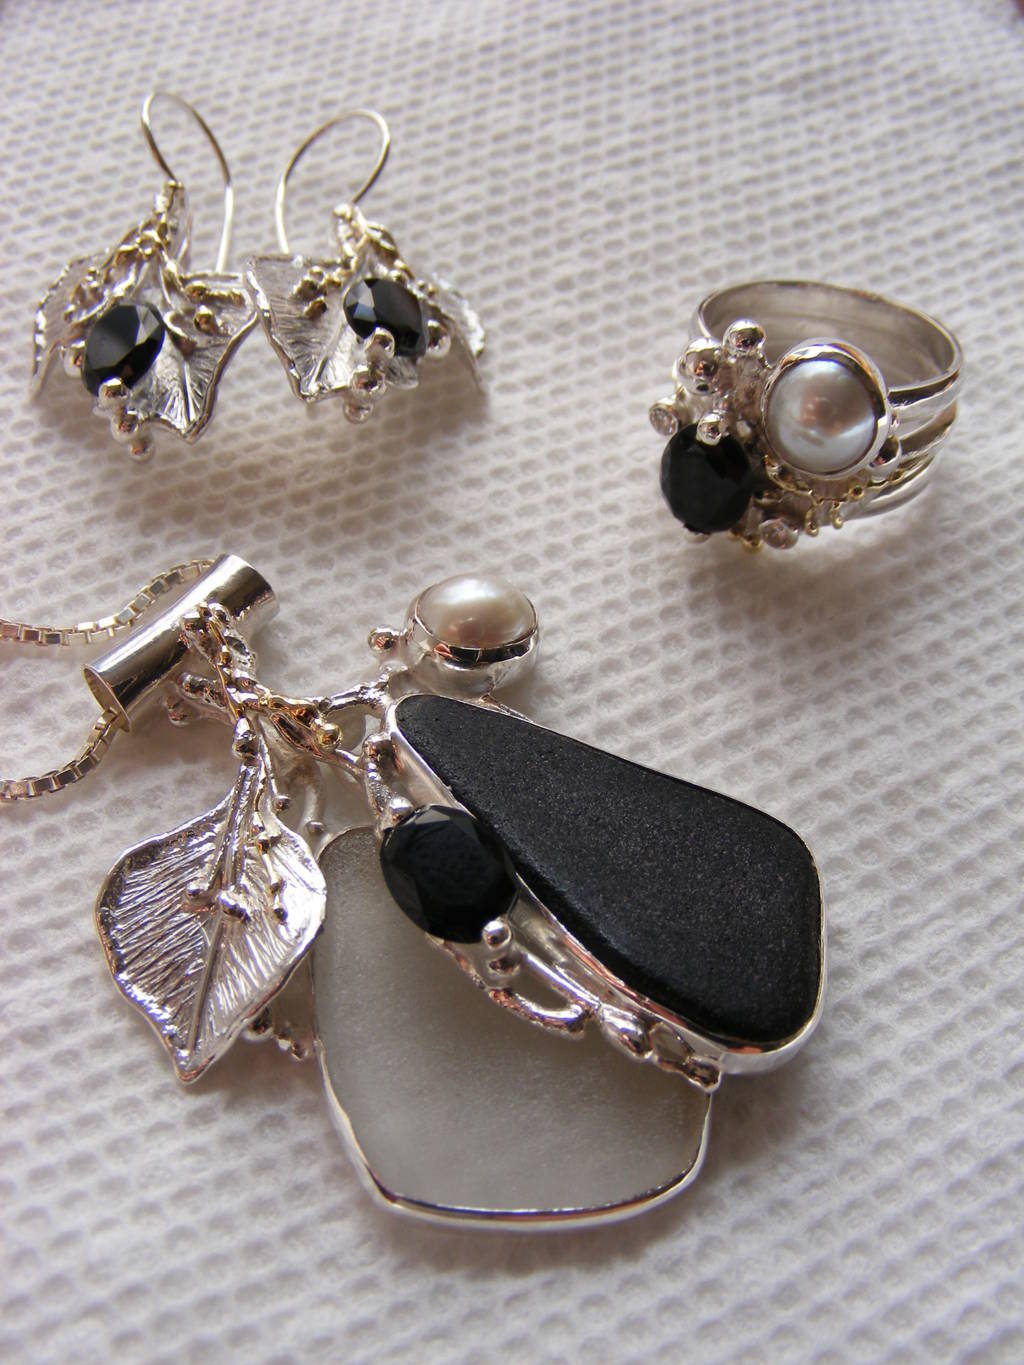 gregory pyra piro black onyx set 57230, gregory pyra piro conceptual one of a kind sculptural jewellery, jewellery handcrafted by jewellery maker, jewellery made from gold and silver with black onyx an pearls, handcrafted conceptual jewellery with sea glass and black onyx, one of a kind handcrafted conceptual jewellery with sea glass and pearls